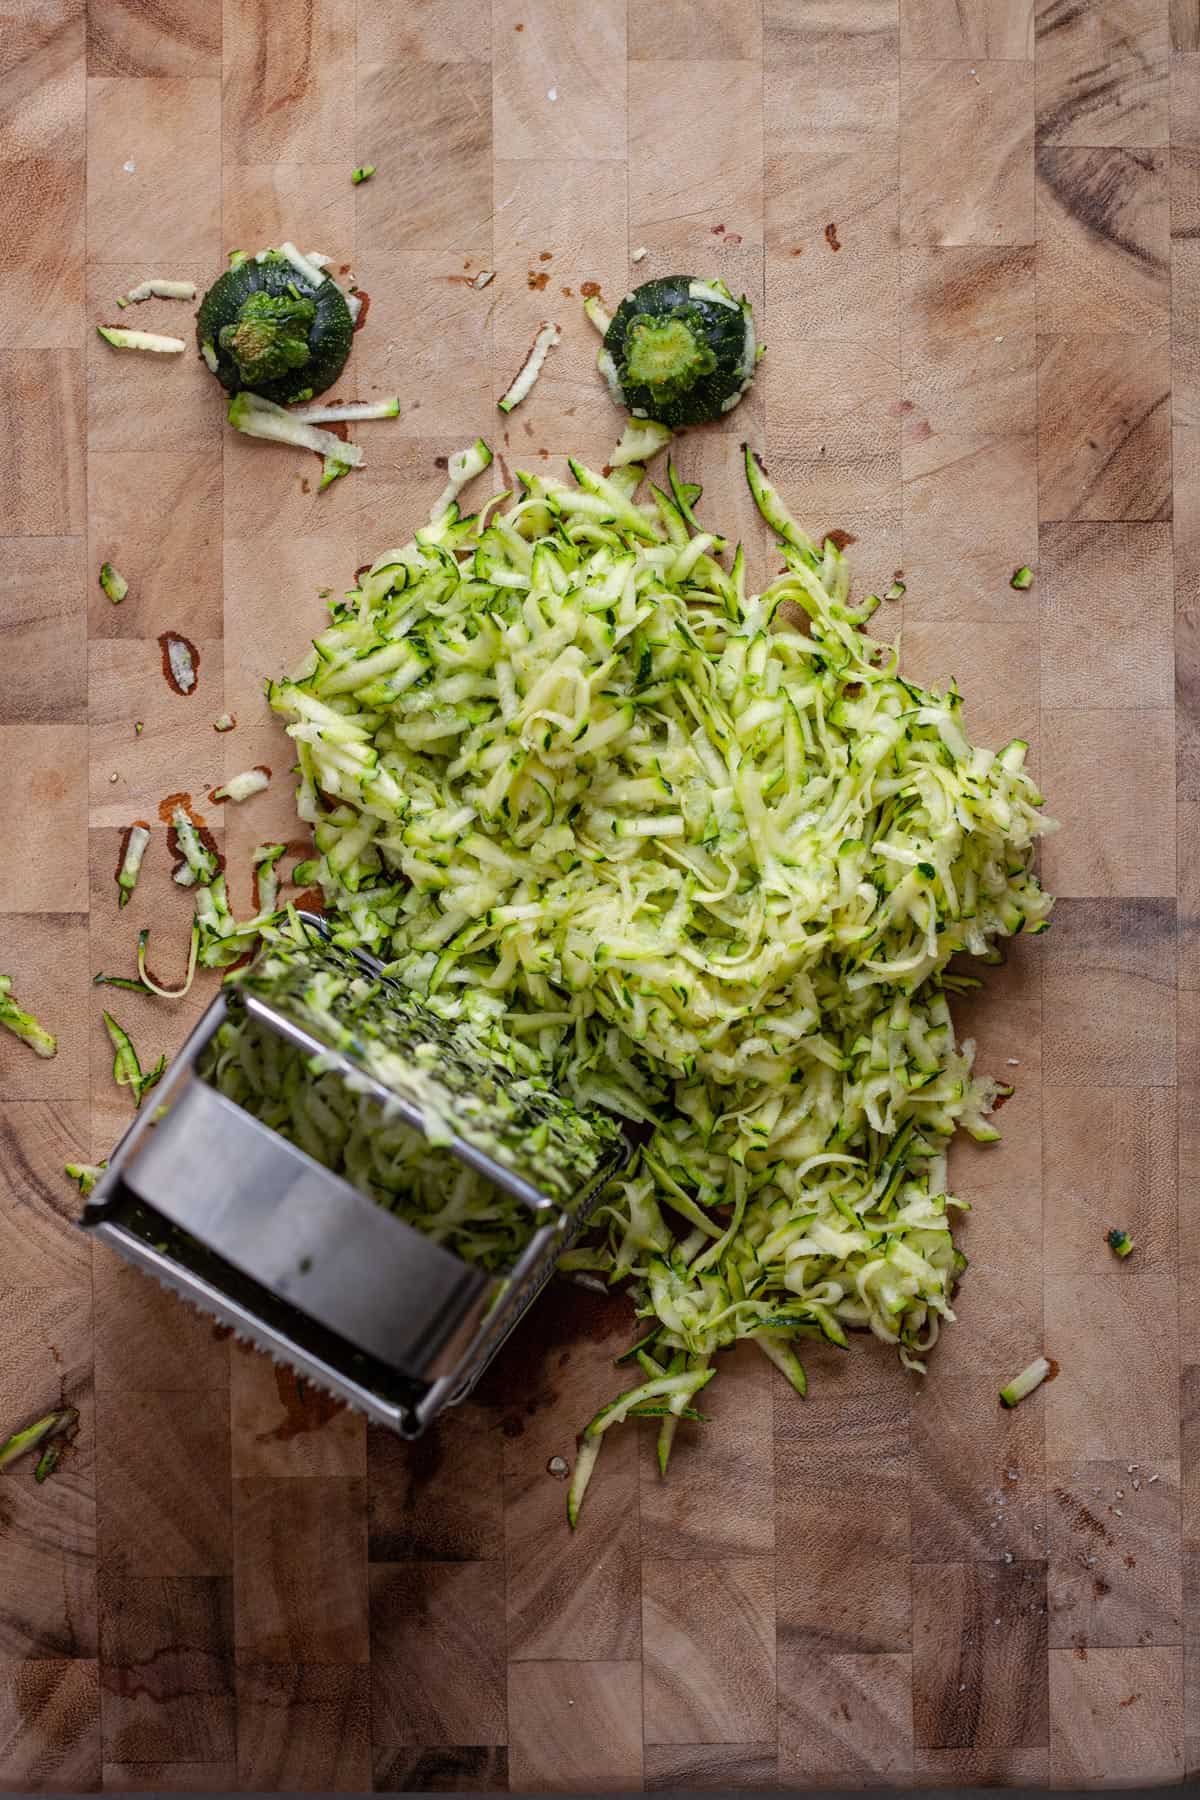 A couple zucchinis grated on a wooden cutting board.